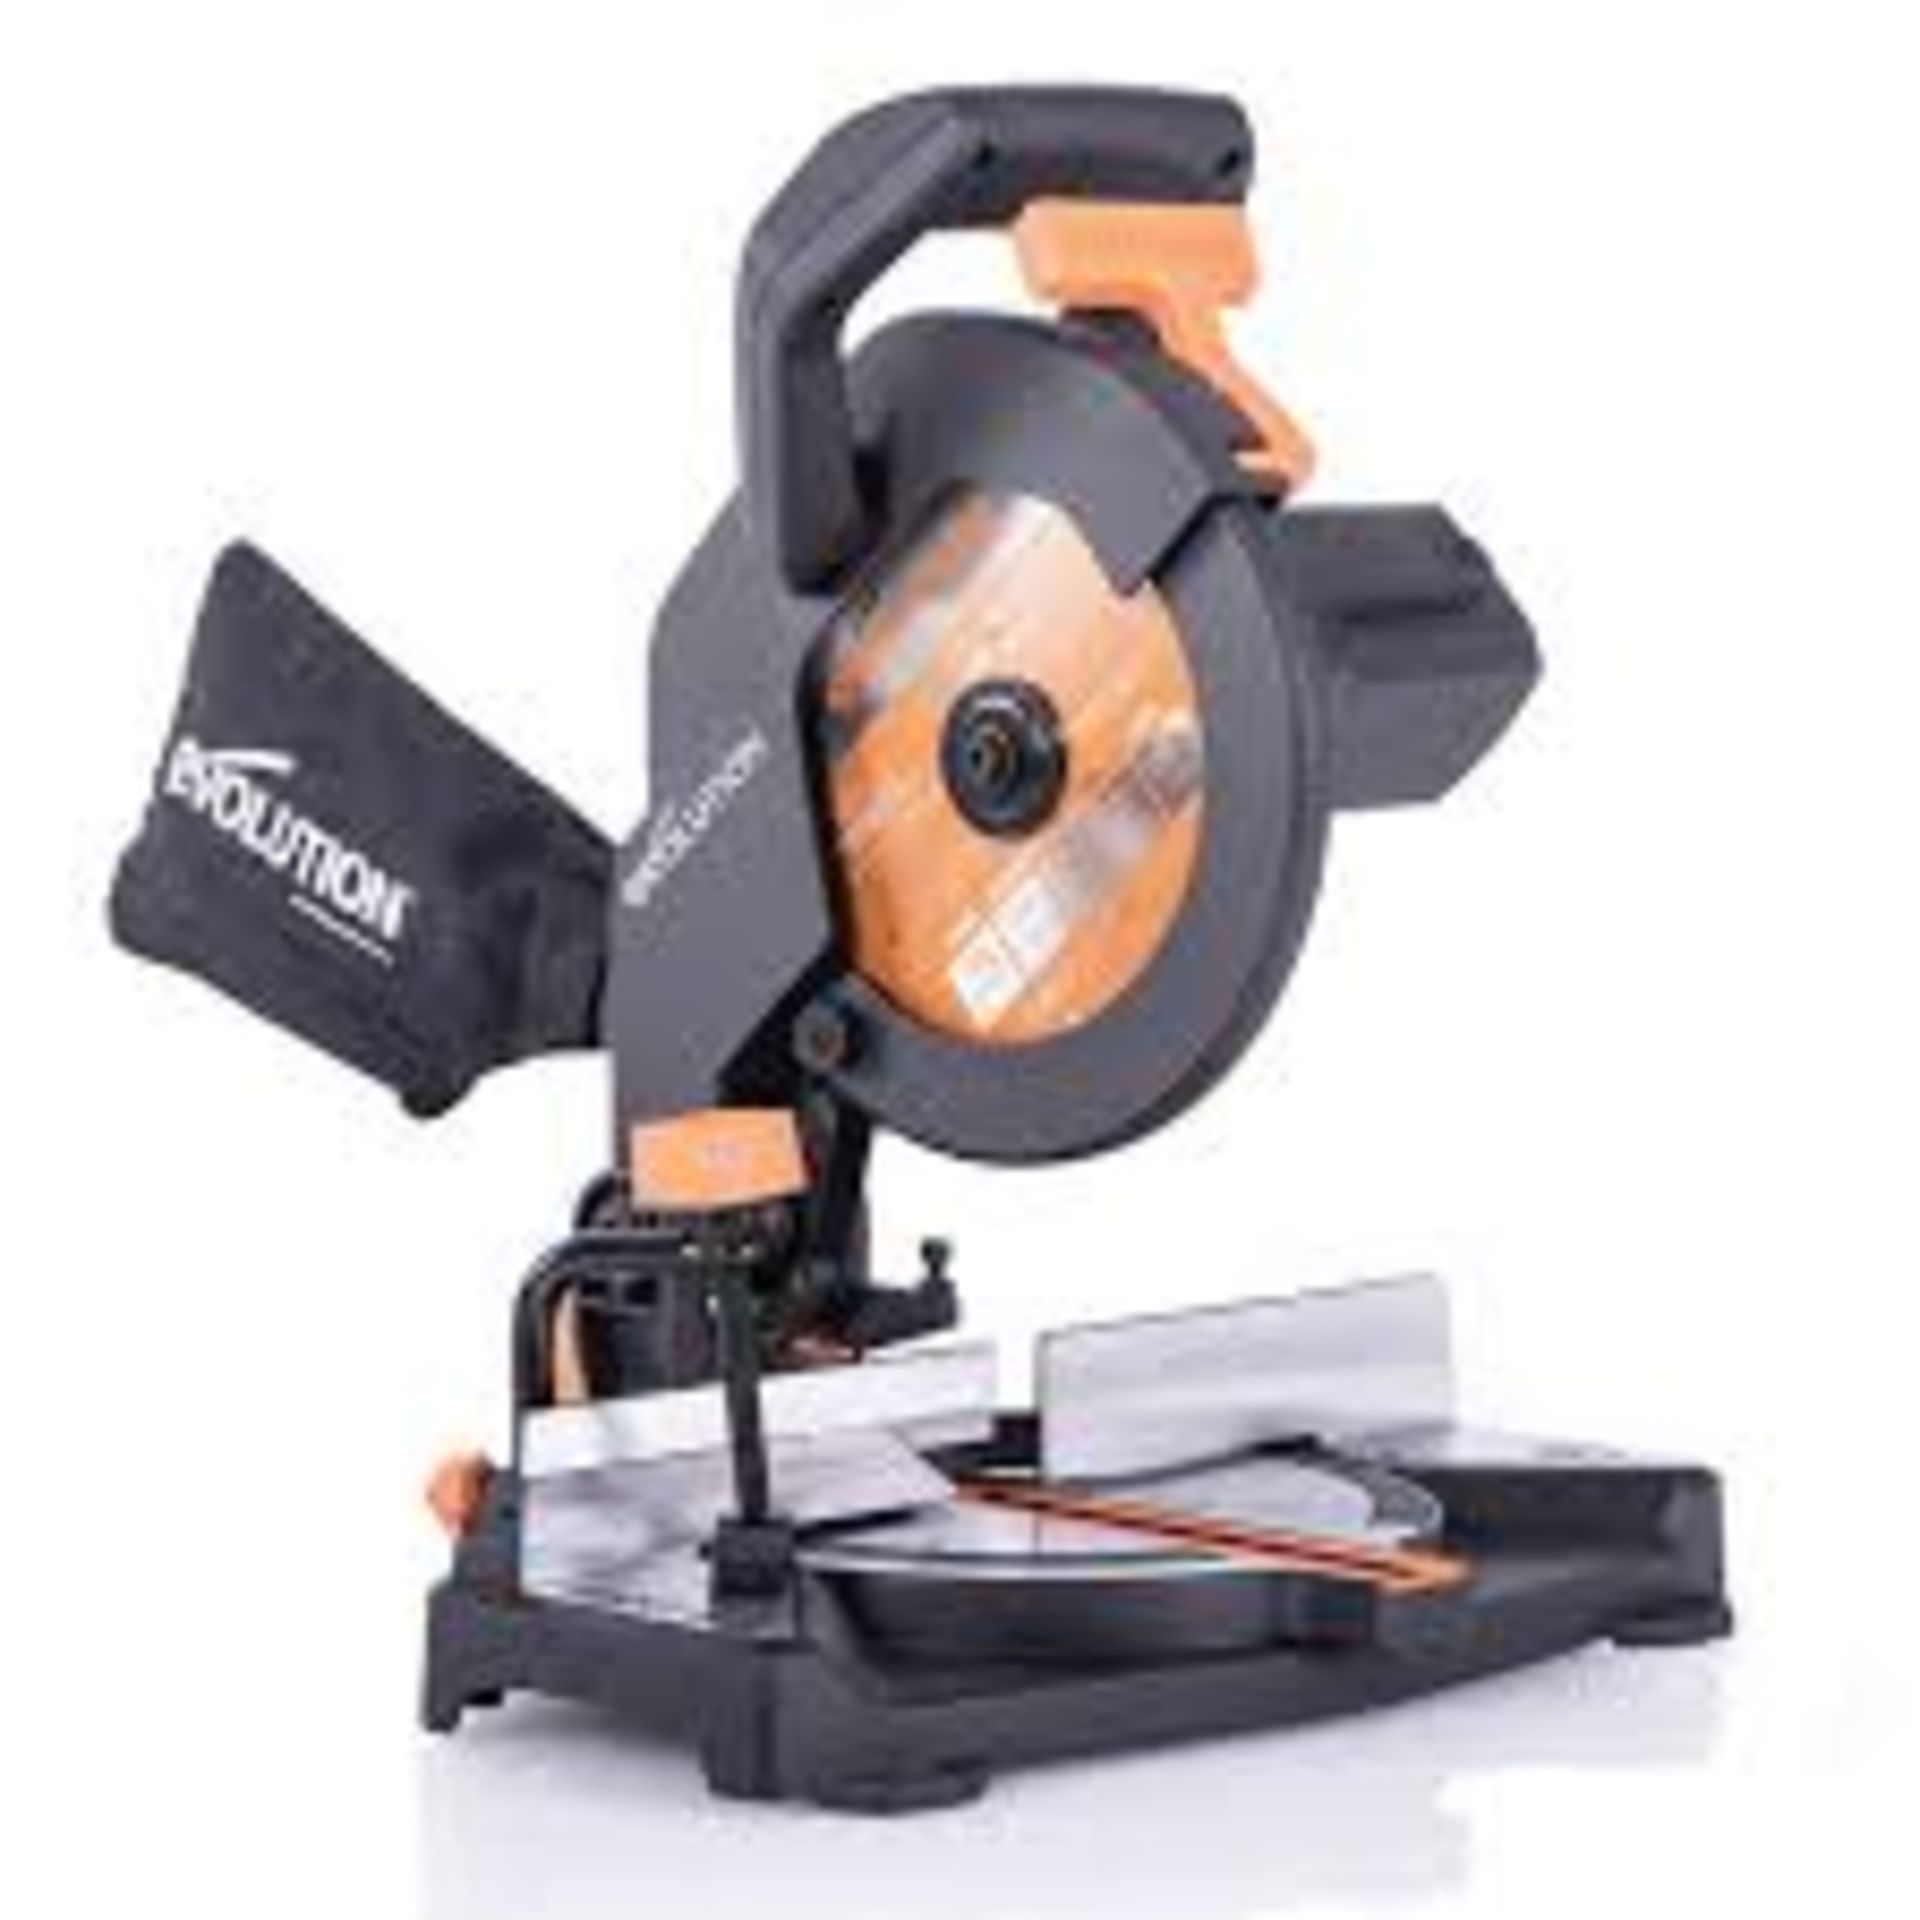 Evolution R210CMS+ 210mm 1200w Compound Mitre Saw. - PW. The R210CMS+ is the perfect Compound